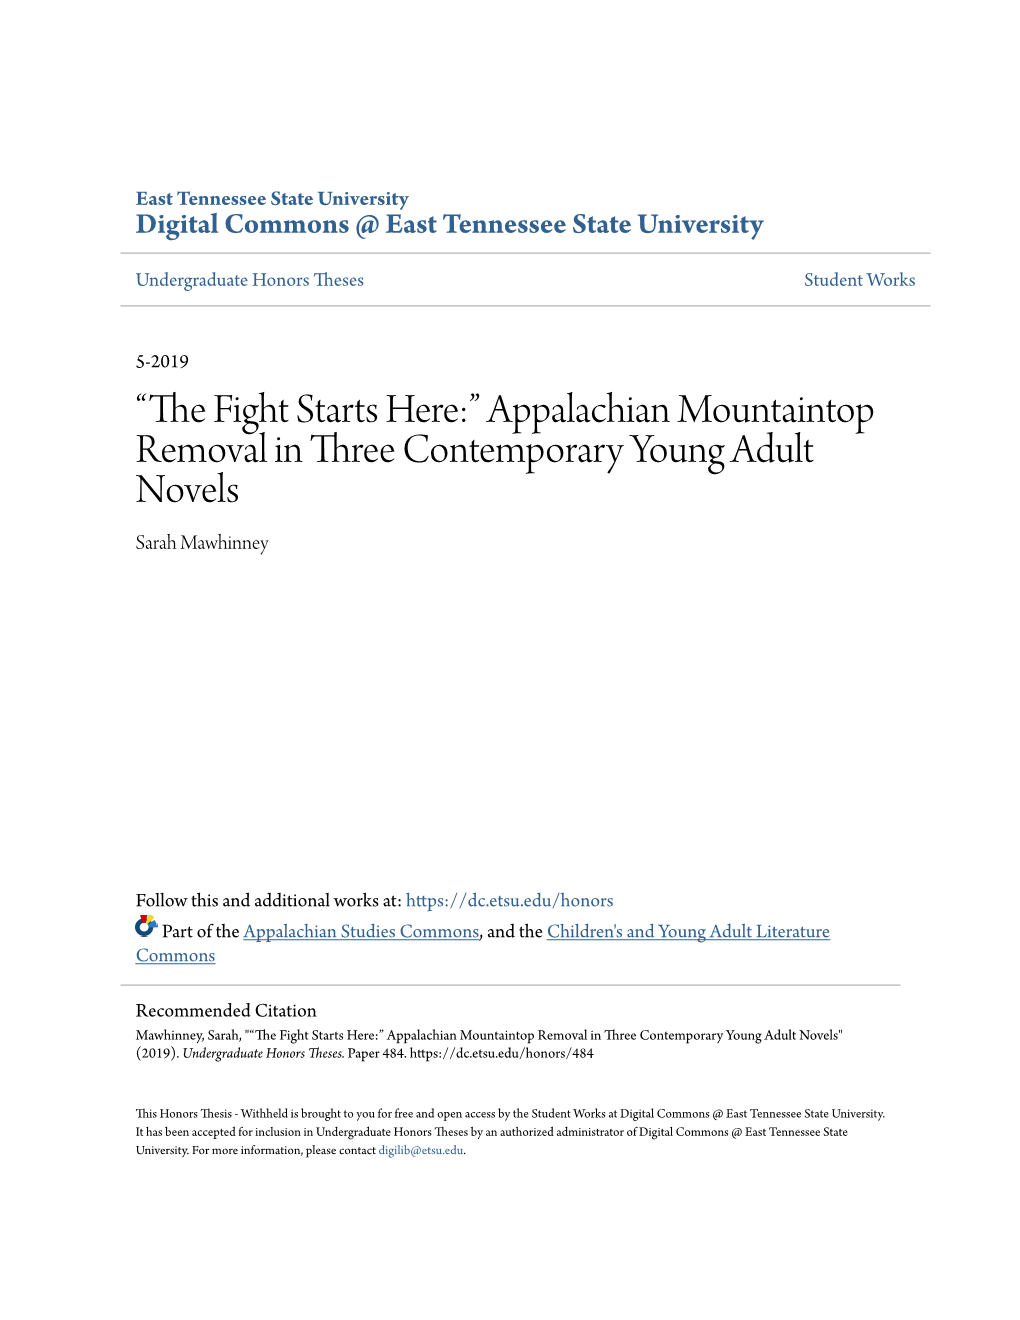 Appalachian Mountaintop Removal in Three Contemporary Young Adult Novels Sarah Mawhinney